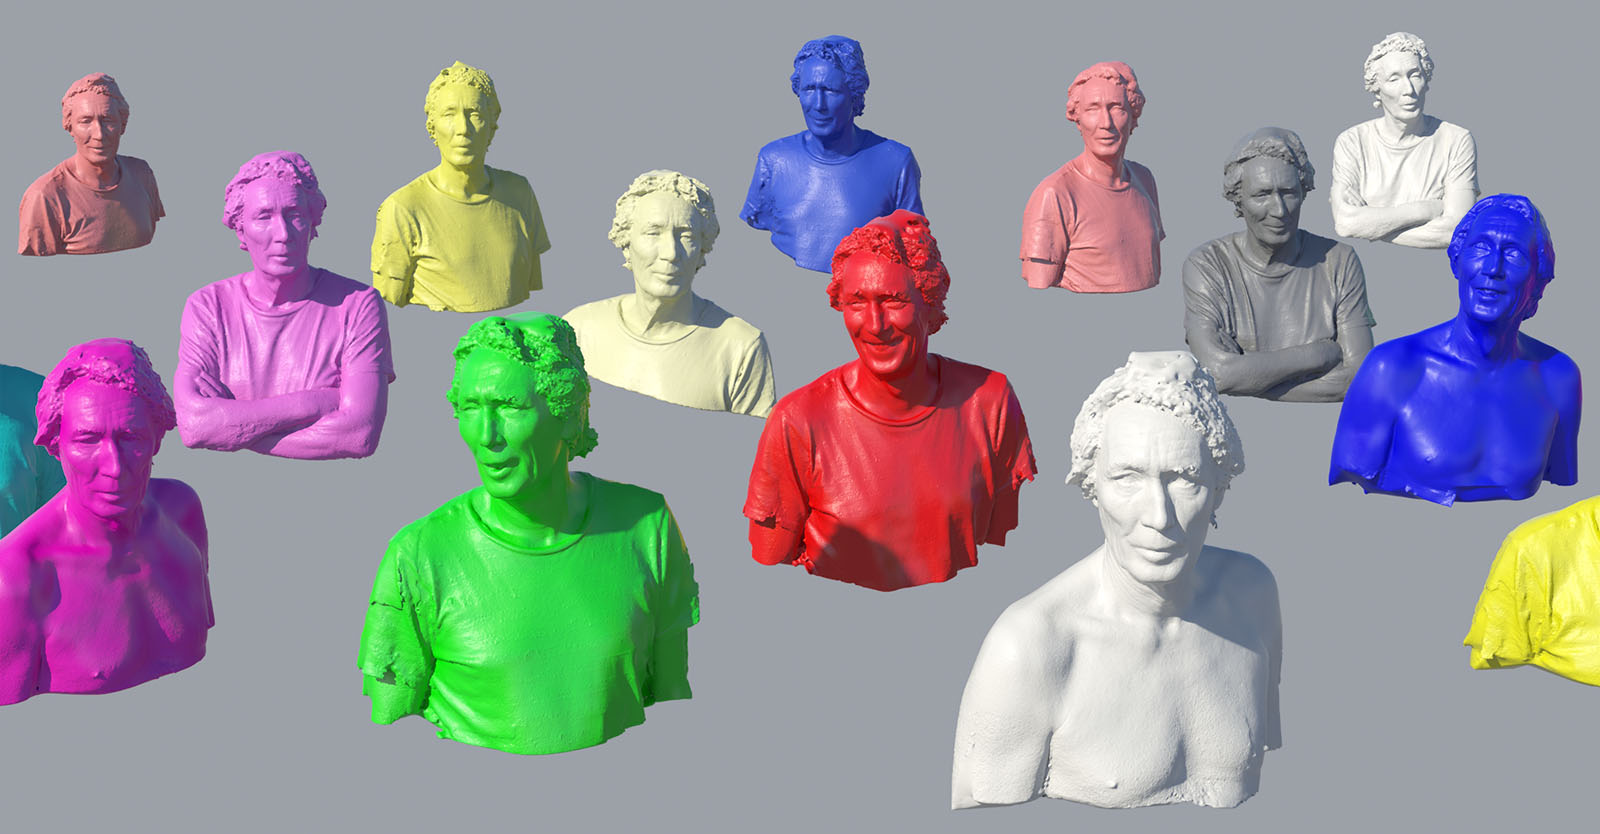 Serie of 3D scan face with different expressions